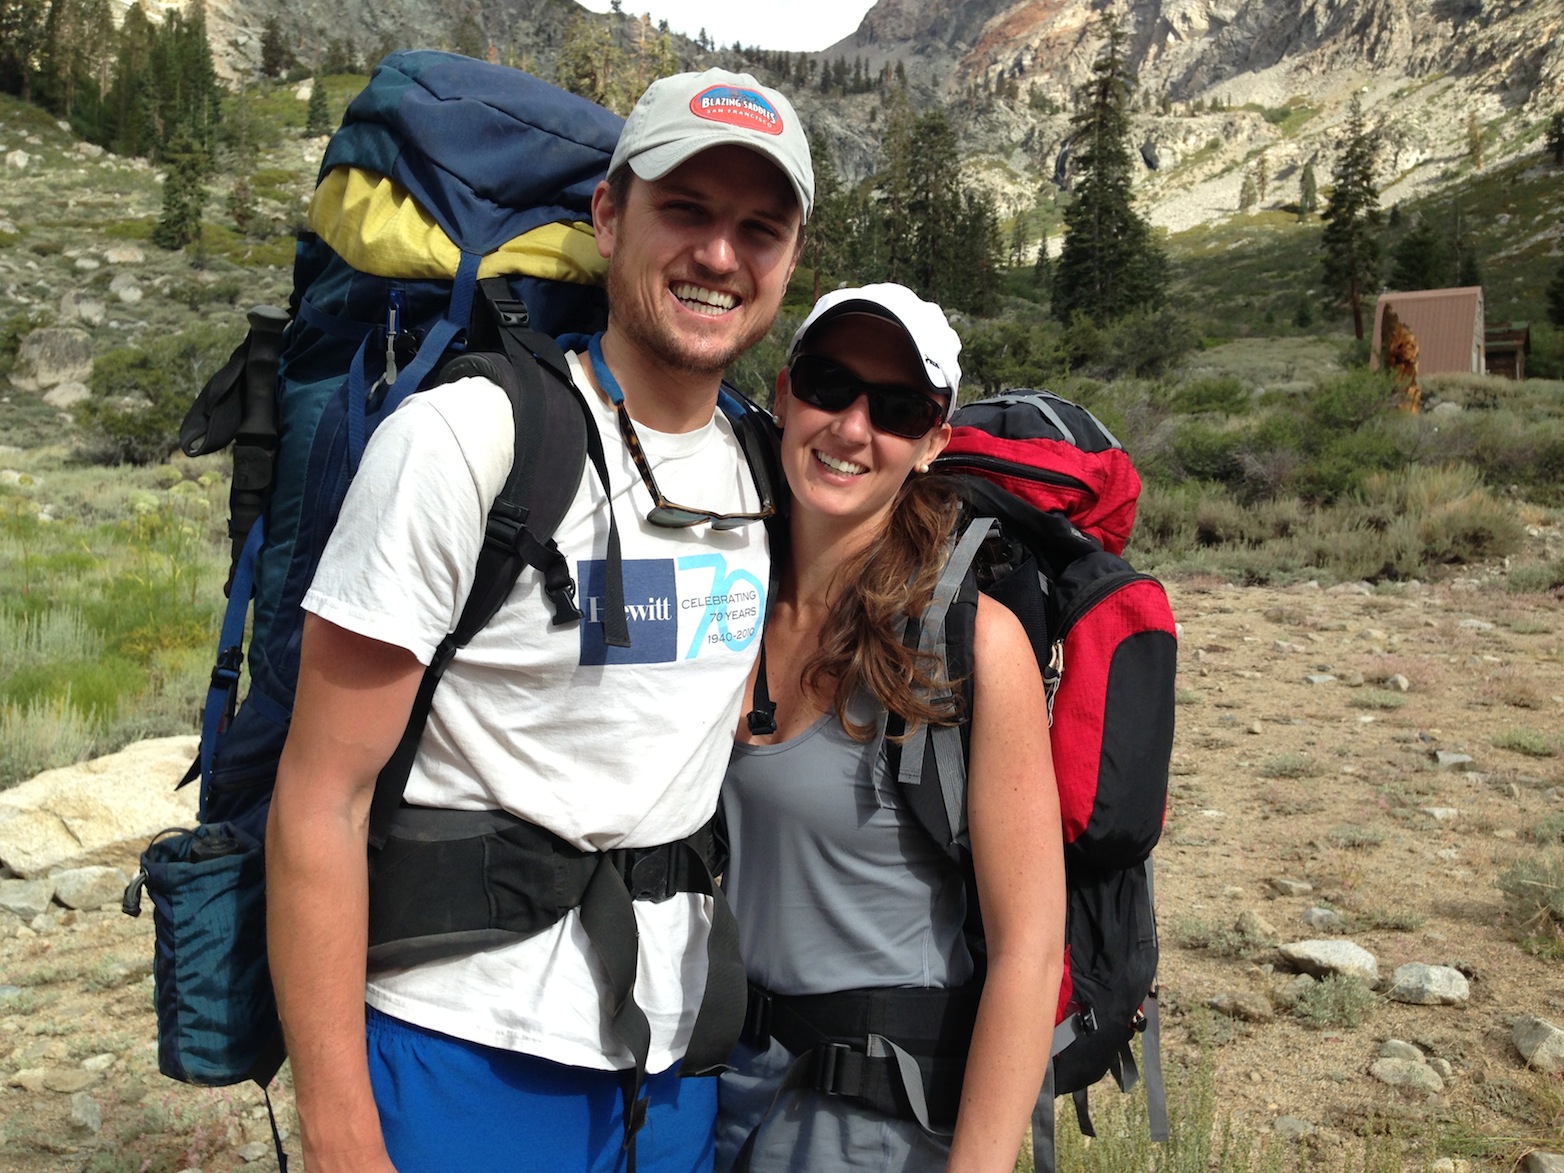 Zach and Cassie on their way up to Kearsarge Pass